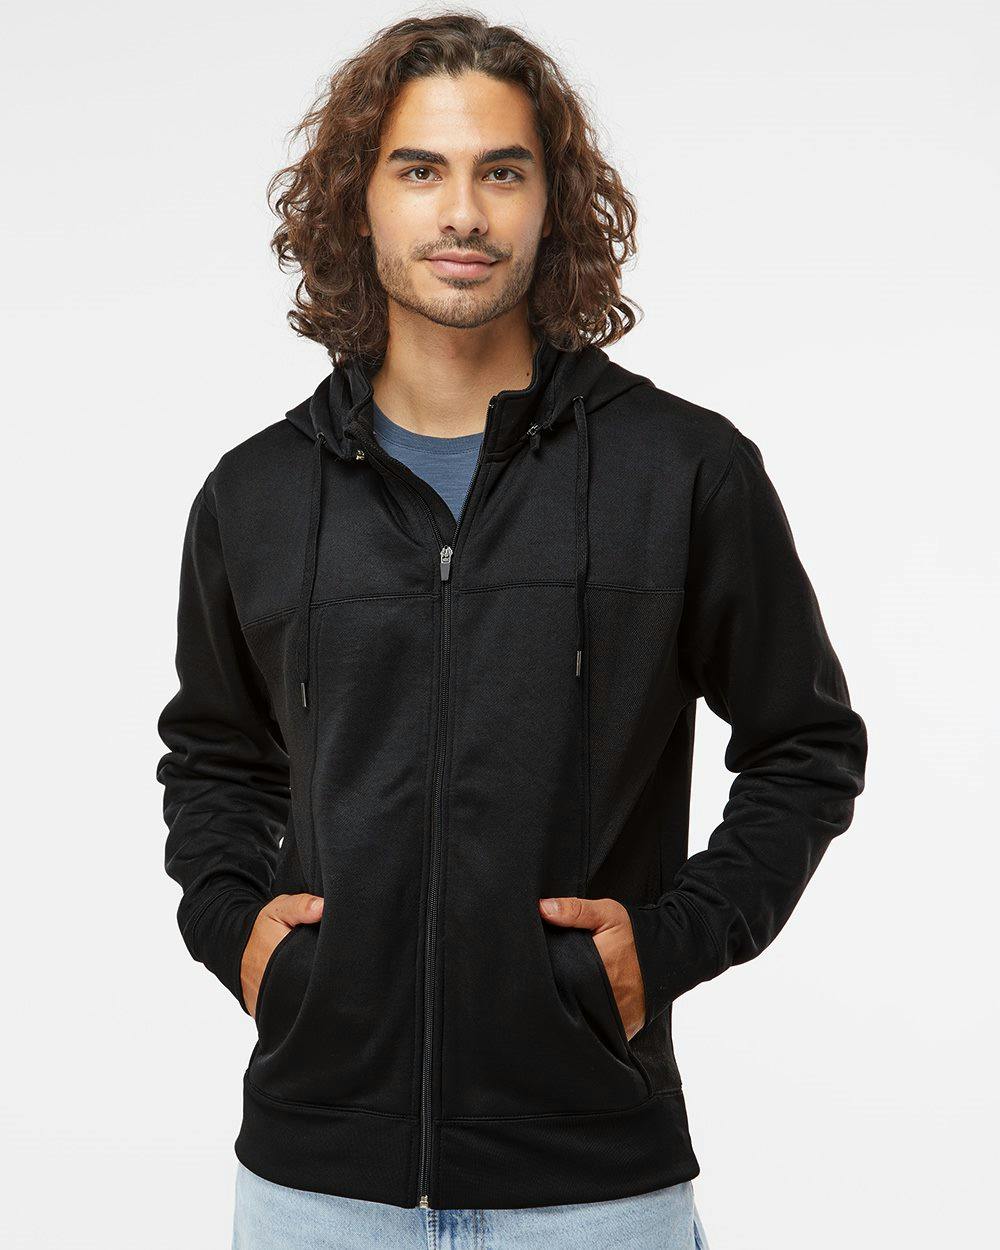 Image for Poly-Tech Full-Zip Hooded Sweatshirt - EXP80PTZ